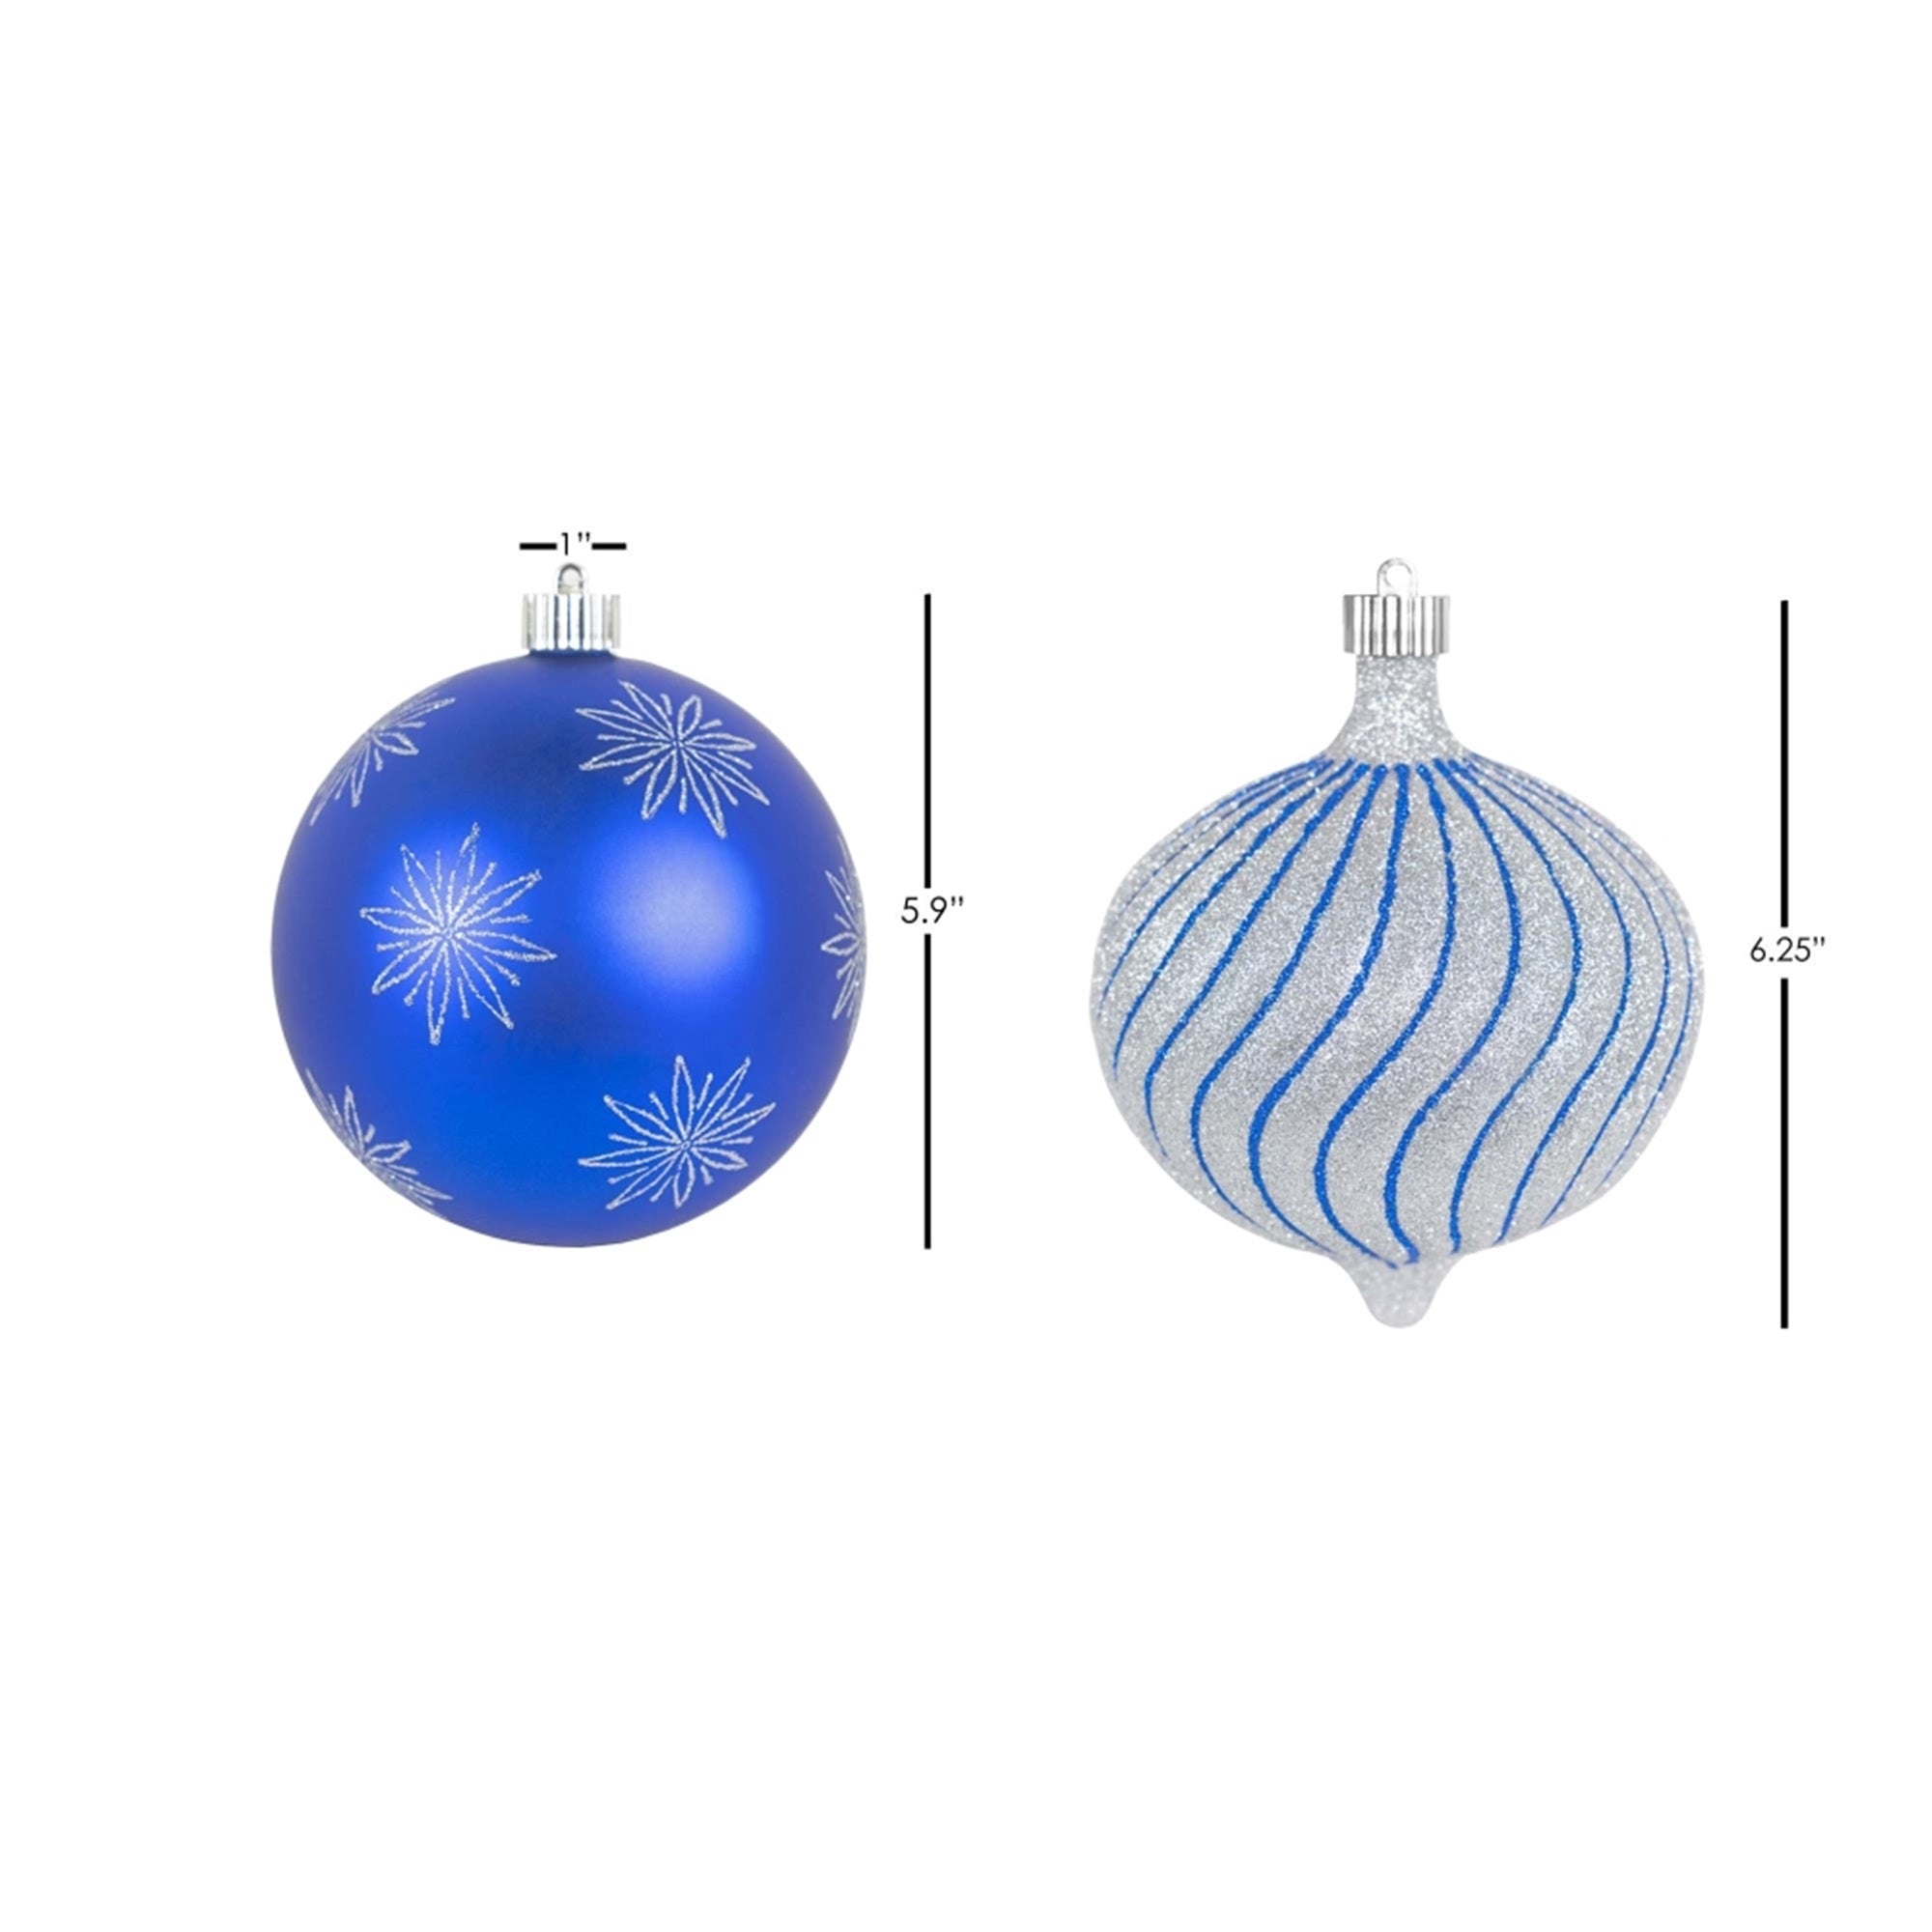 Christmas By Krebs Decorative Ball Ornament, 6 Inch, Blue & Silver (Pack of 8)